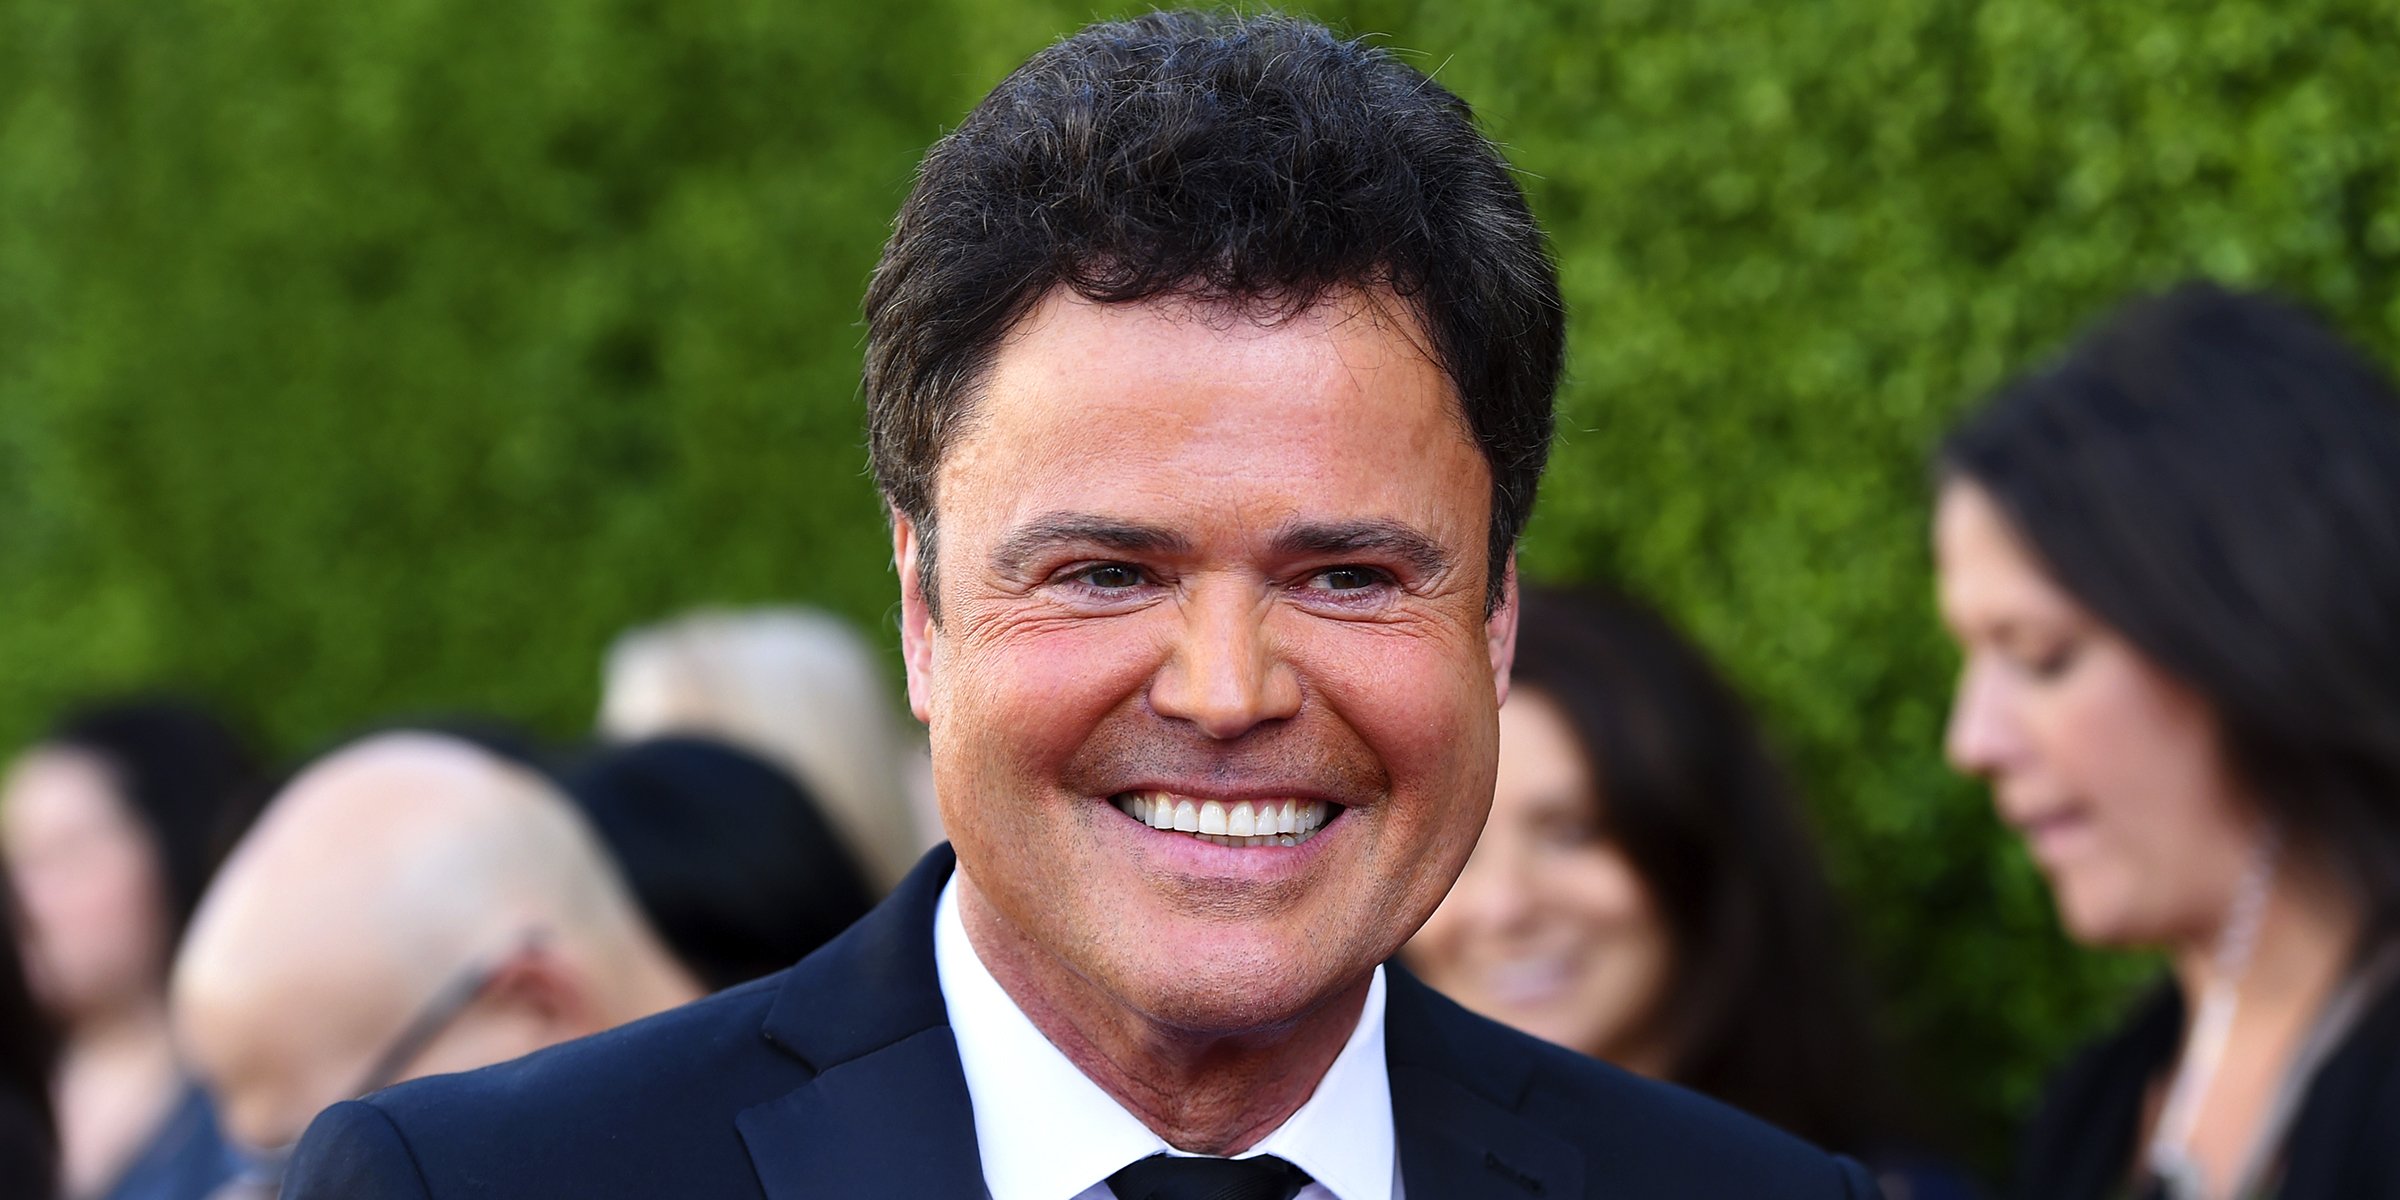 Donny Osmond | Source: Getty Images